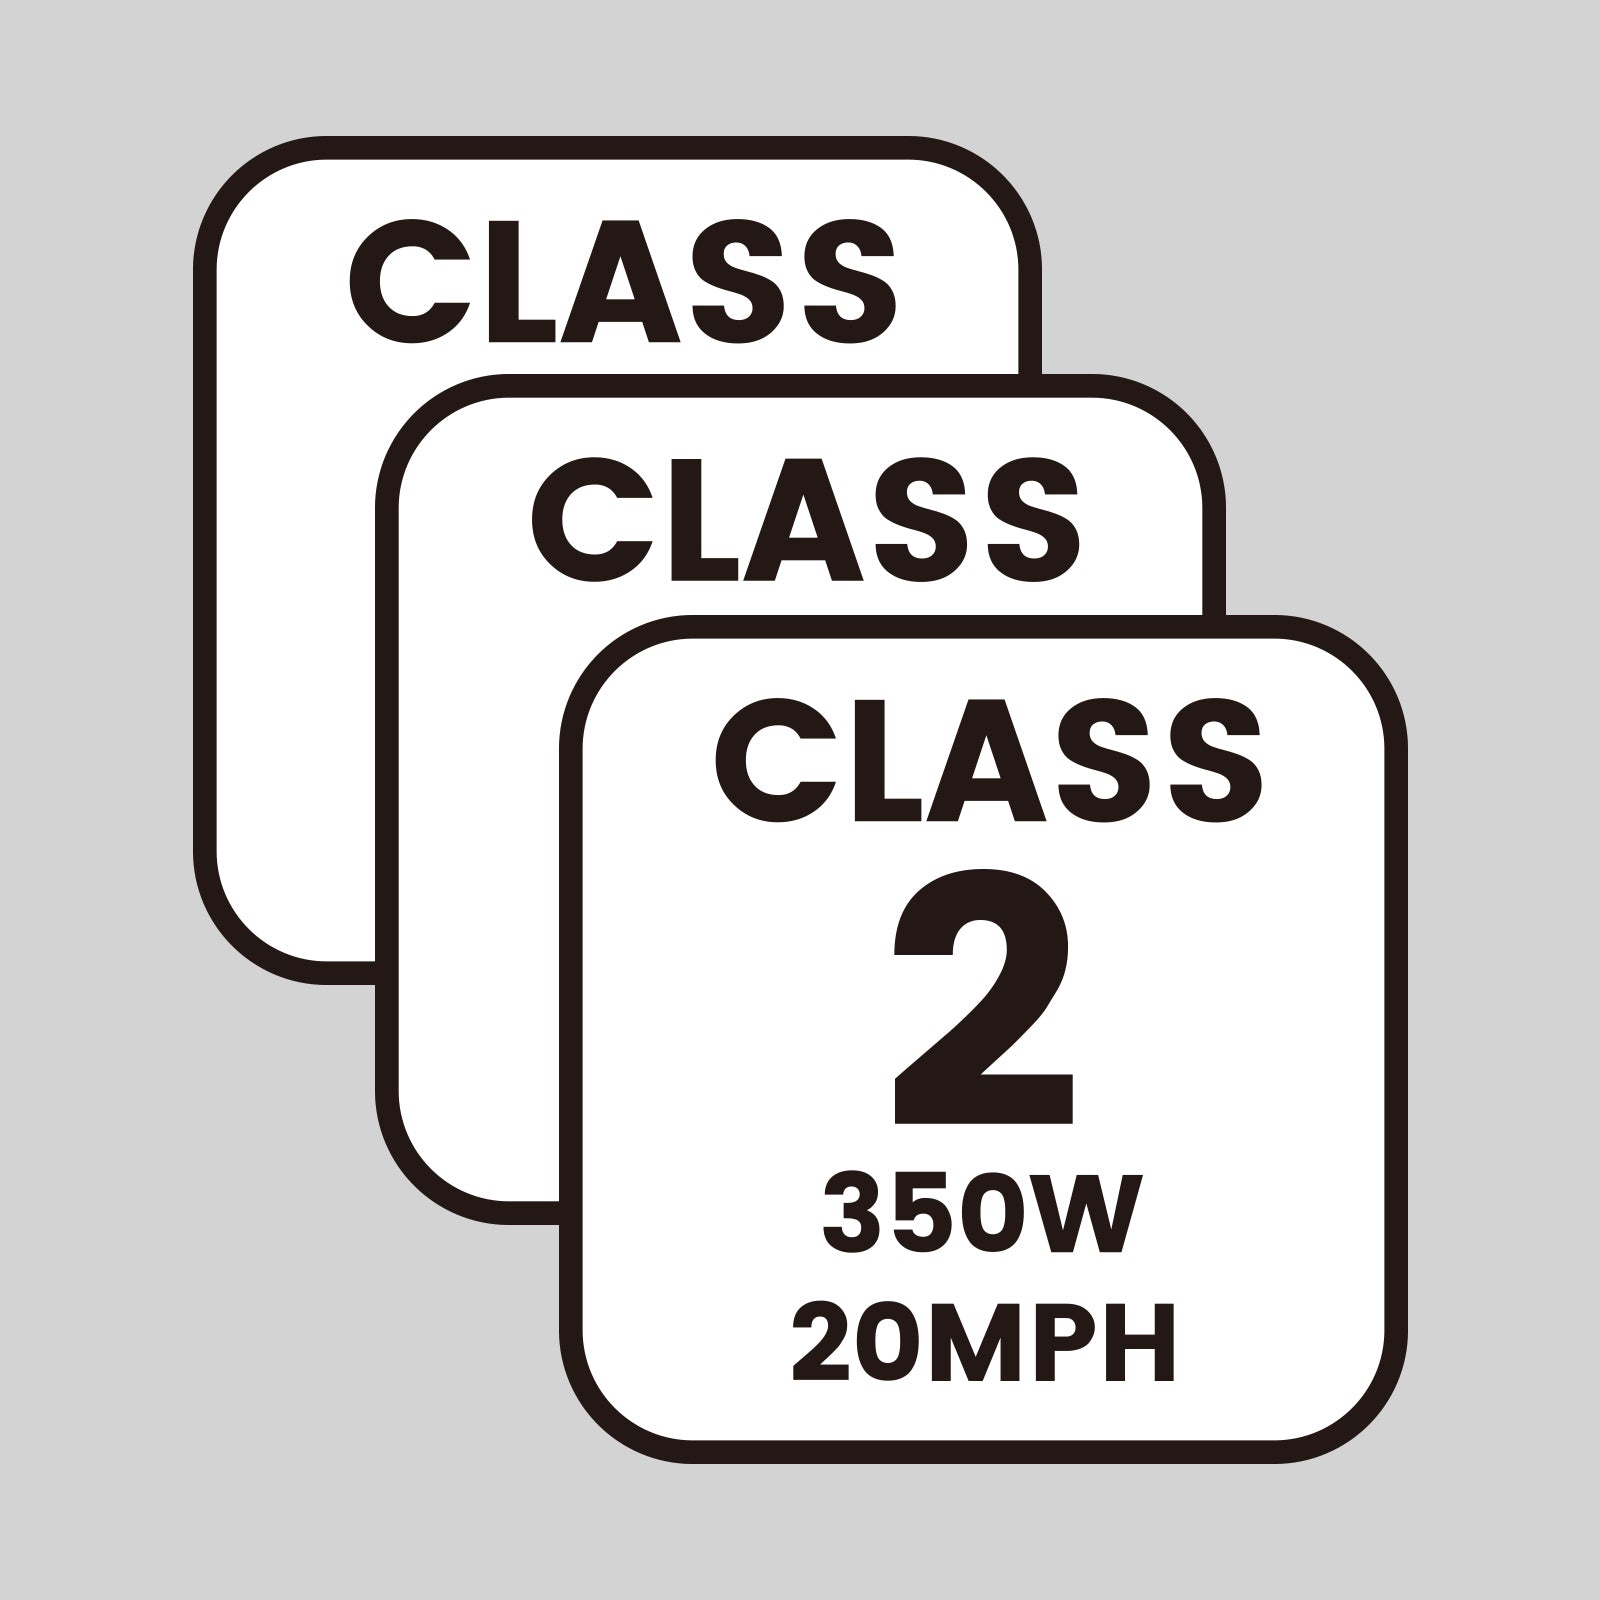 All e-bikes in California must have a 1.5 x 1.5 inch vinyl label detailing the type, top assisted speed, and motor wattage. Class 1 e-bikes are pedal-assist only, with no throttle, and have a maximum assisted speed of 20 mph. Class 2 e-bikes are throttle-assisted with a maximum speed of 20 mph. Class 3 e-bikes are pedal-assist only, with no throttle, and have a maximum assisted speed of 28 mph.